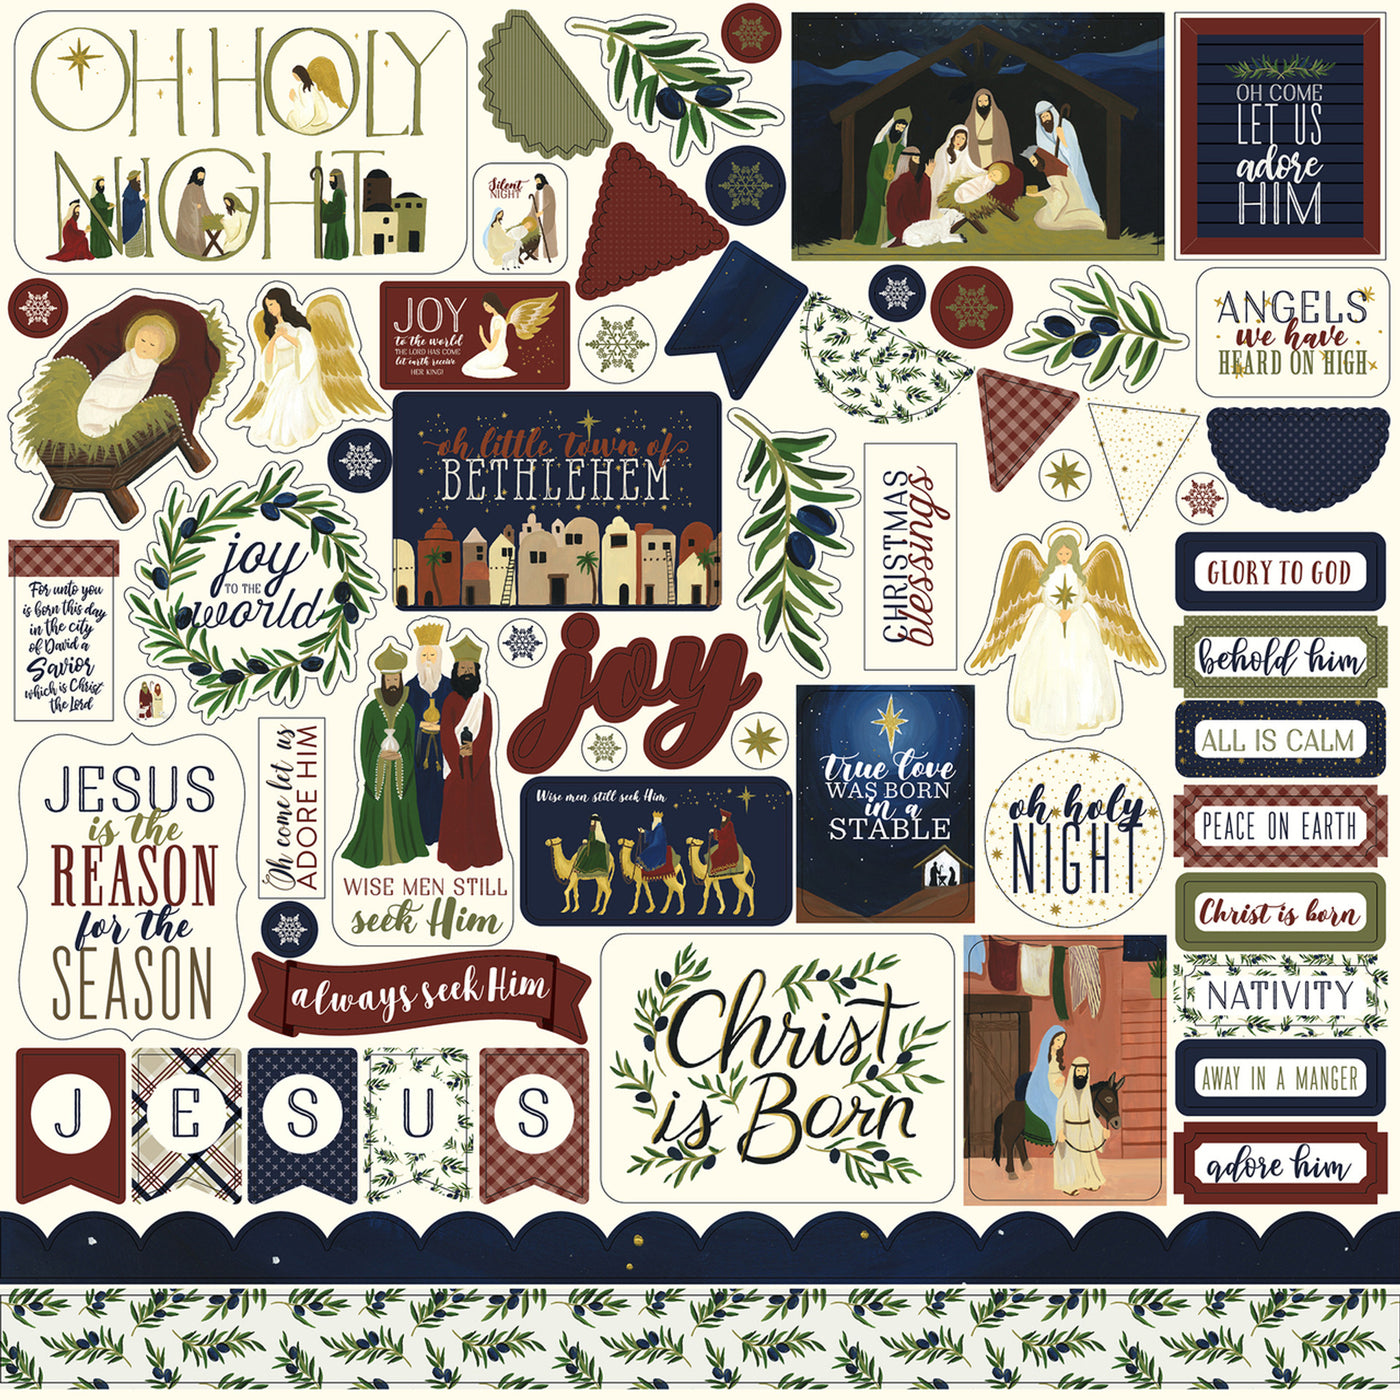 Oh Holy Night Elements 12" x 12" Cardstock Stickers from the Oh Holy Night Christmas Collection by Echo Park. These stickers include the three Wisemen, baby Jesus, a nativity scene, angels, banners, borders, and more!&nbsp;&nbsp;